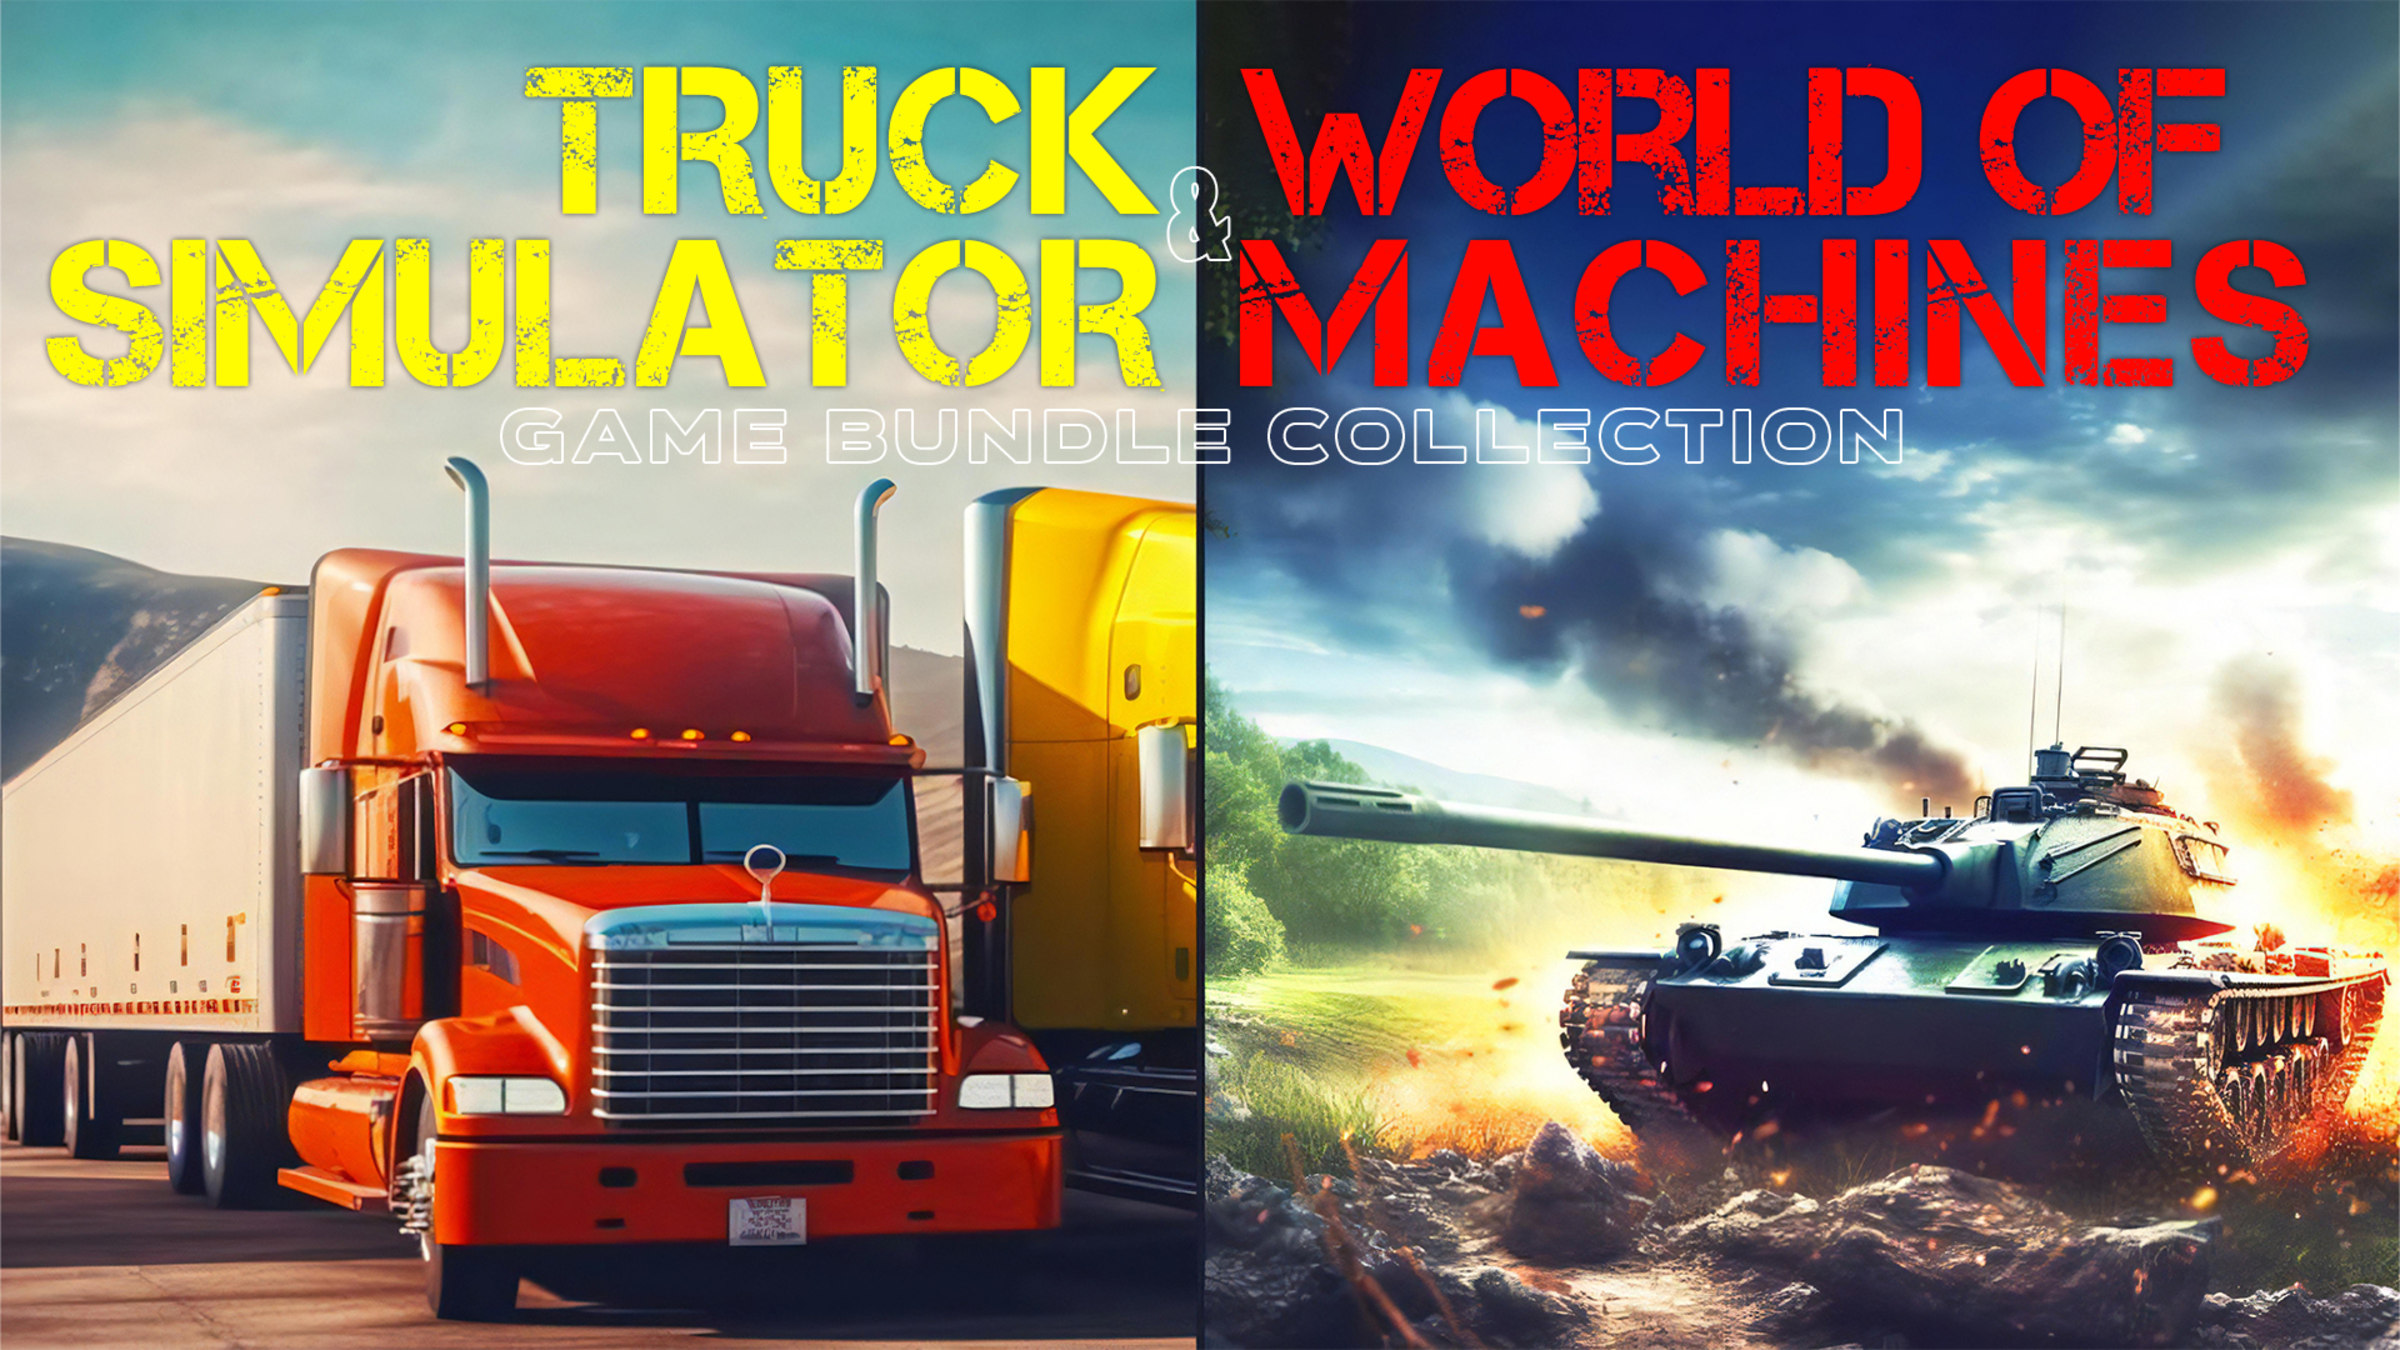 Perfect Truck Bundle for Nintendo Switch - Nintendo Official Site